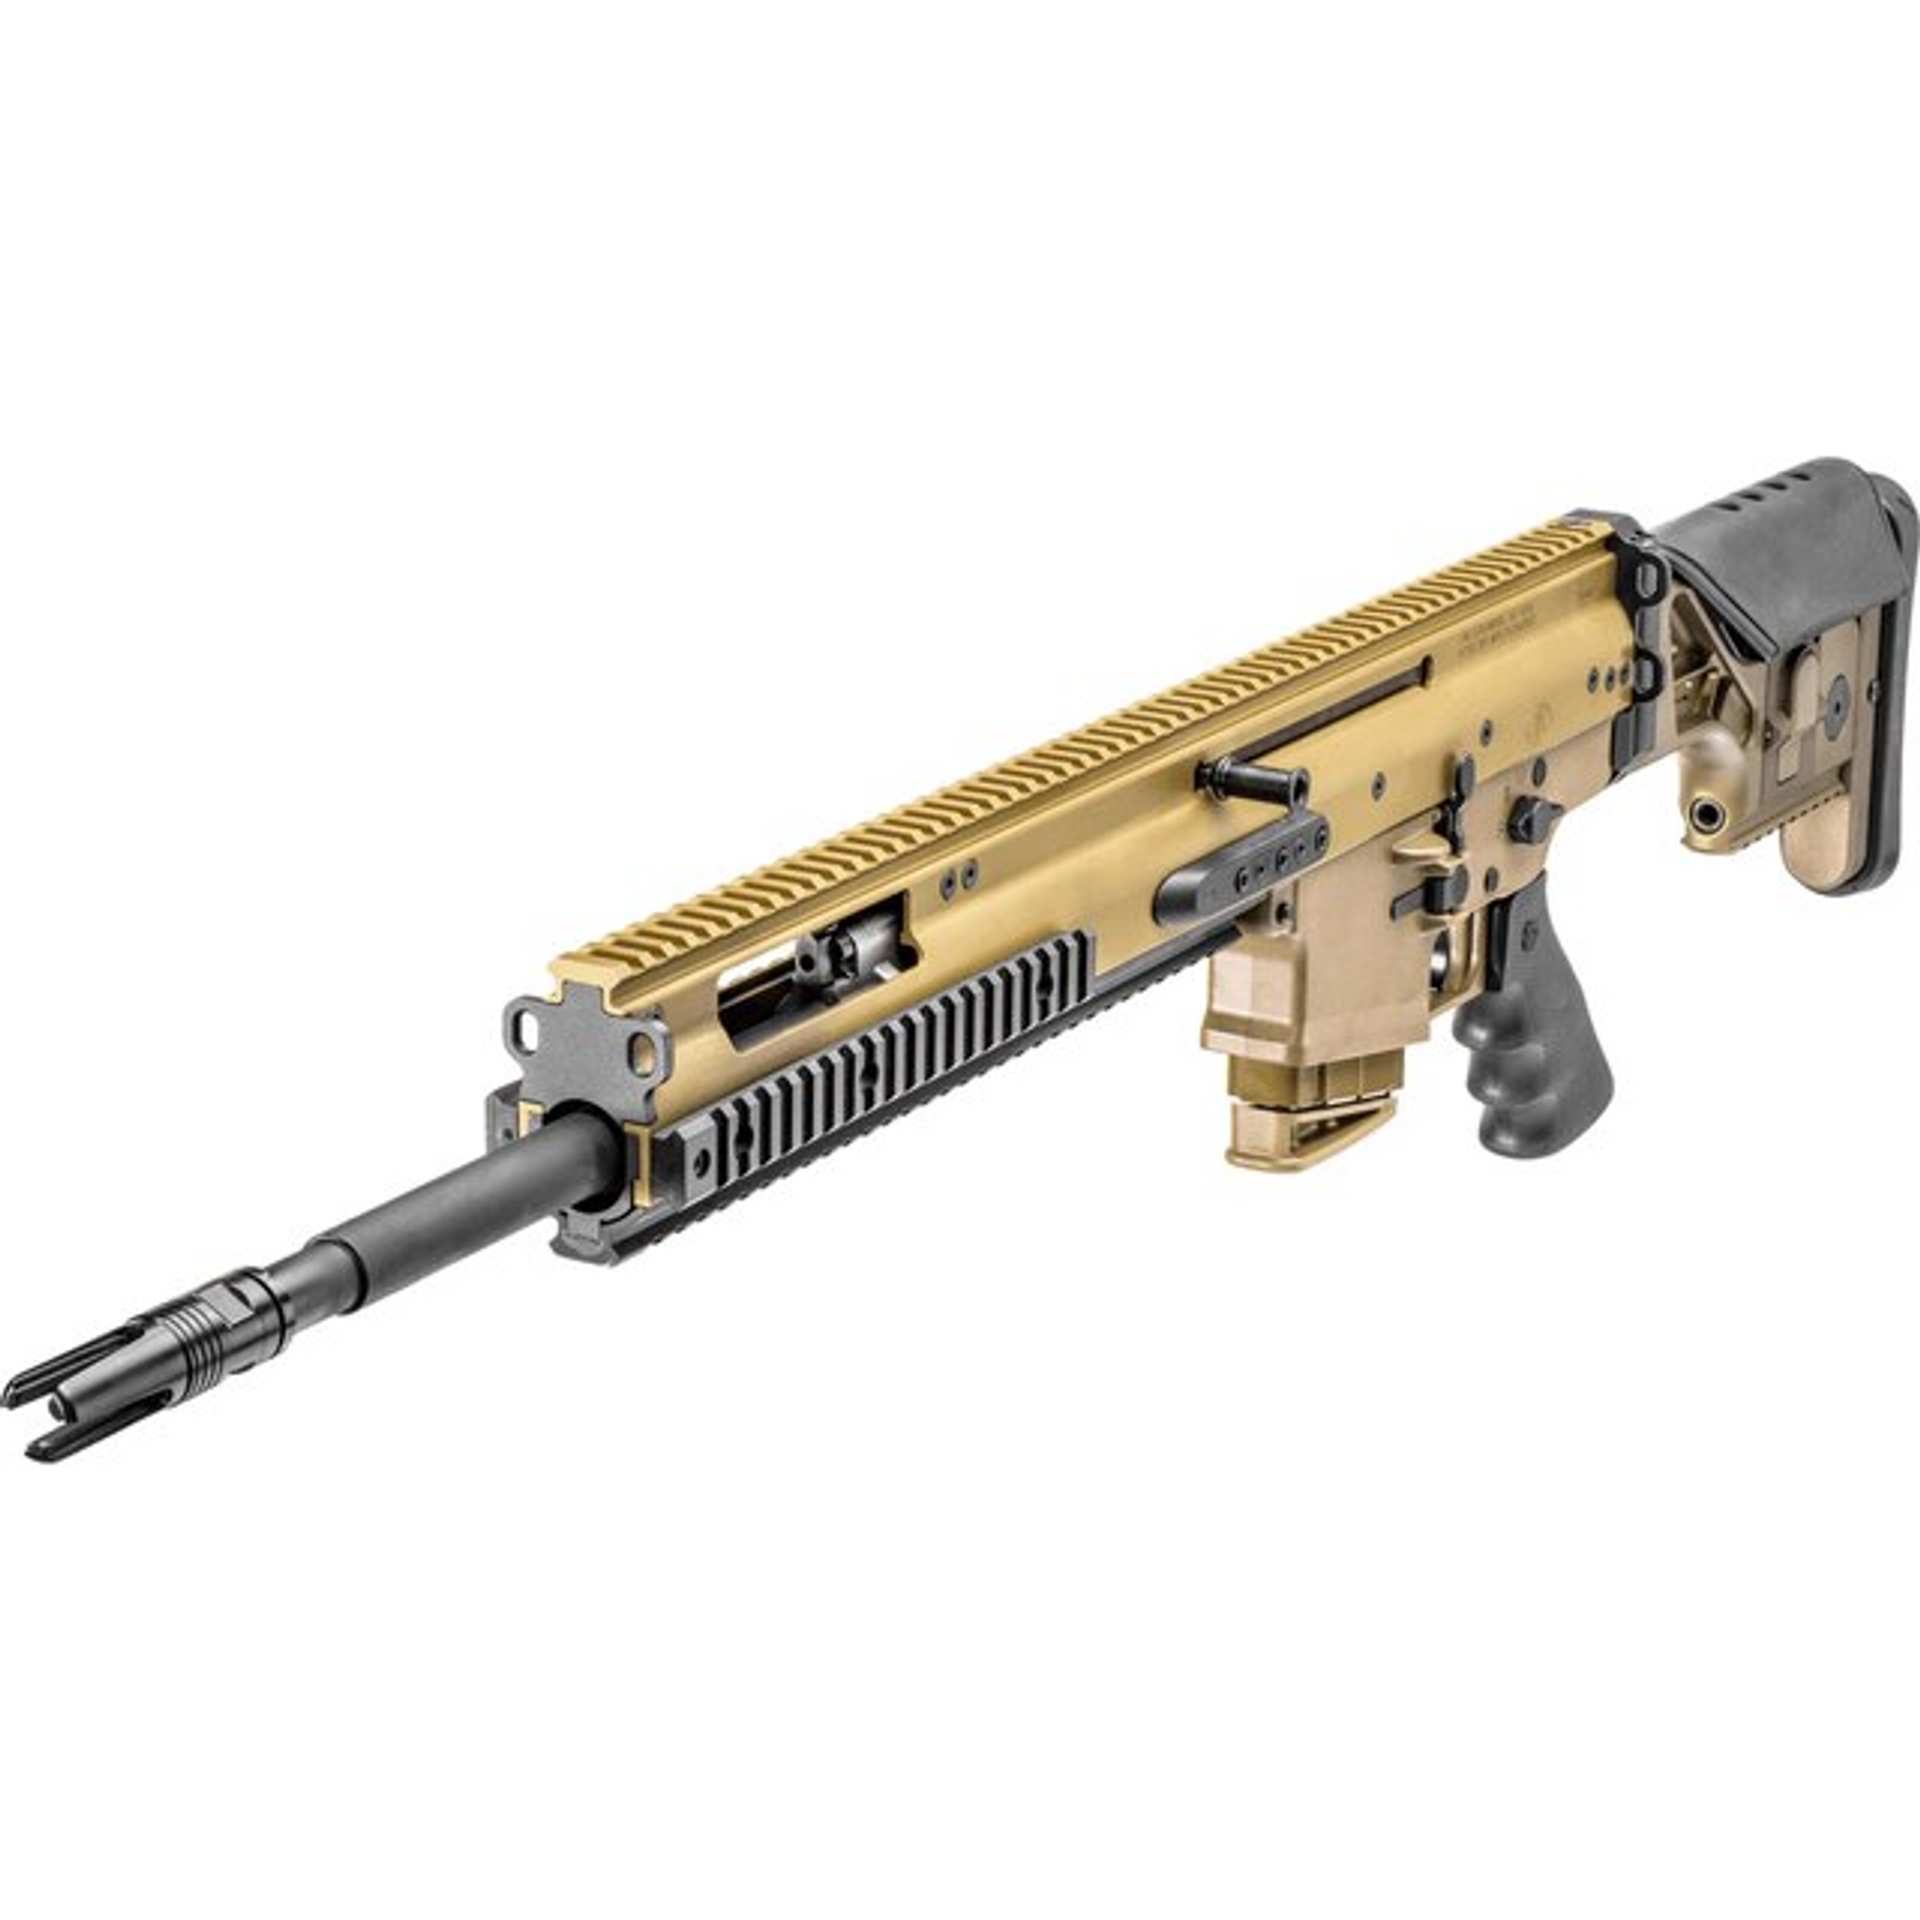 FN SCAR 20S 6.5 CM in FDE | For Sale - shipped to local gun dealer